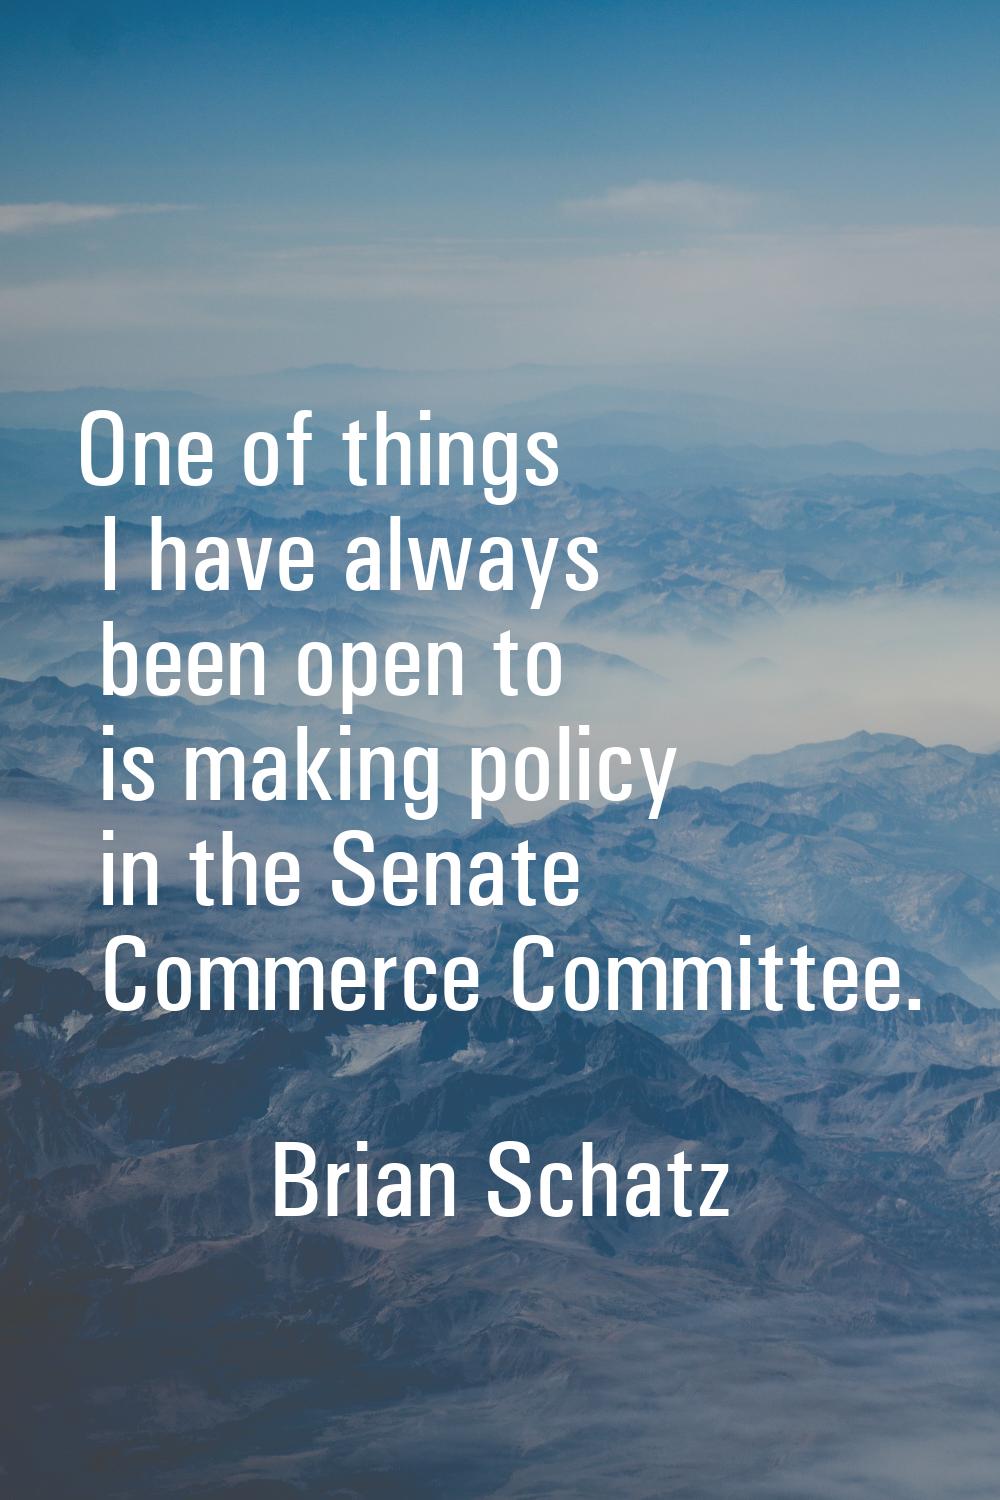 One of things I have always been open to is making policy in the Senate Commerce Committee.